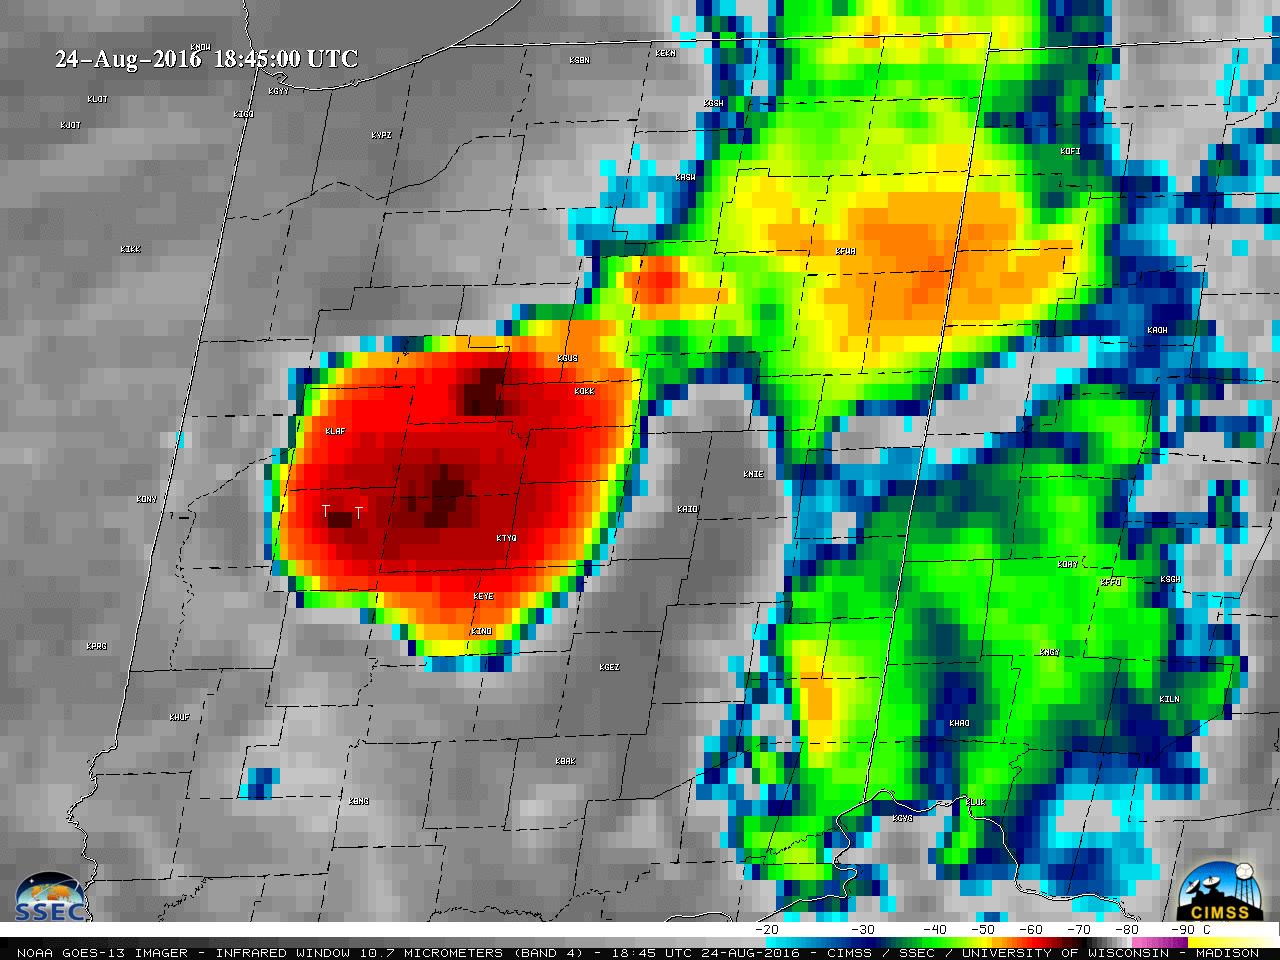 GOES-13 Infrared Window (10.7 µm) images, with plots of SPC storm reports of tornadoes in white and hail/wind in cyan [click to play animation]